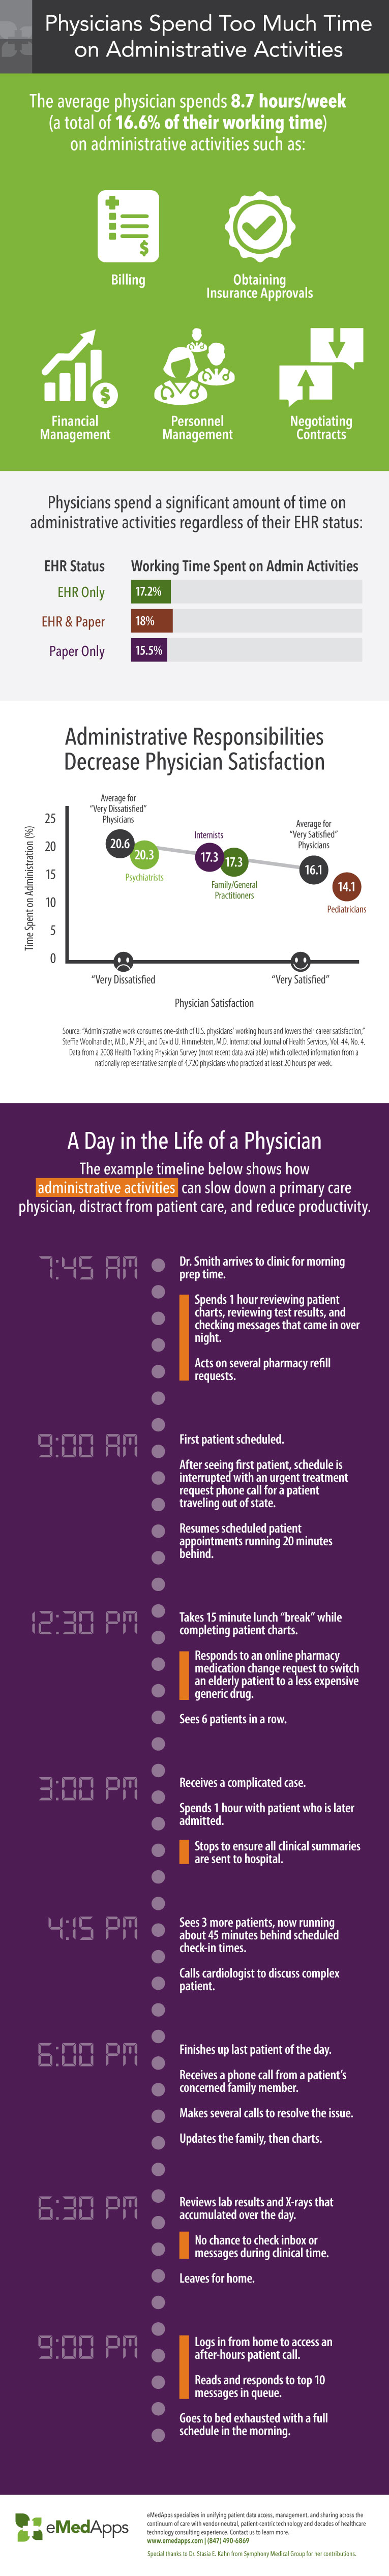 Physicians Spend Too Much Time on Administrative Activities